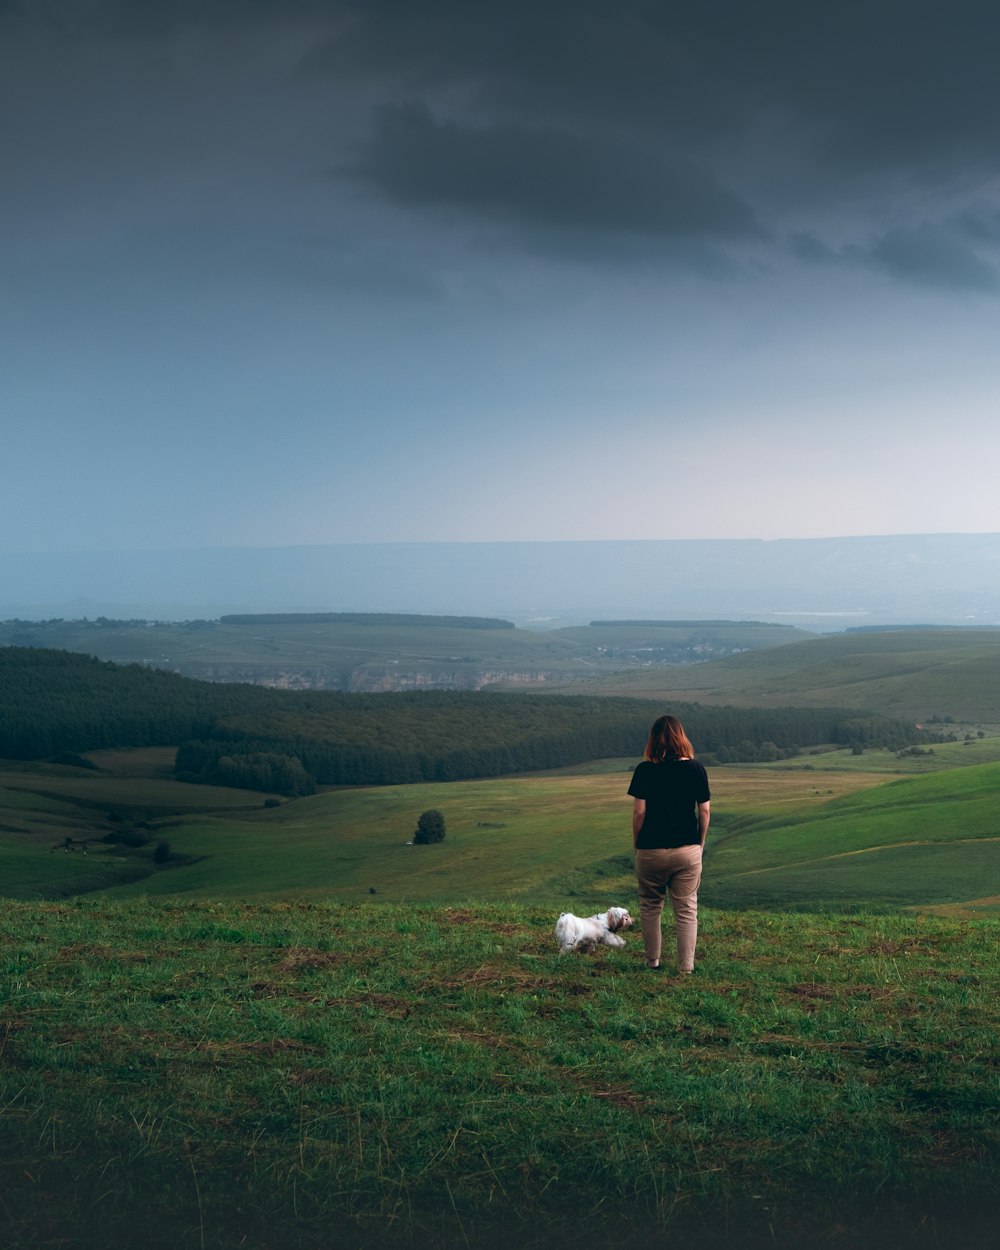 a person and a dog on a grassy hill overlooking a valley